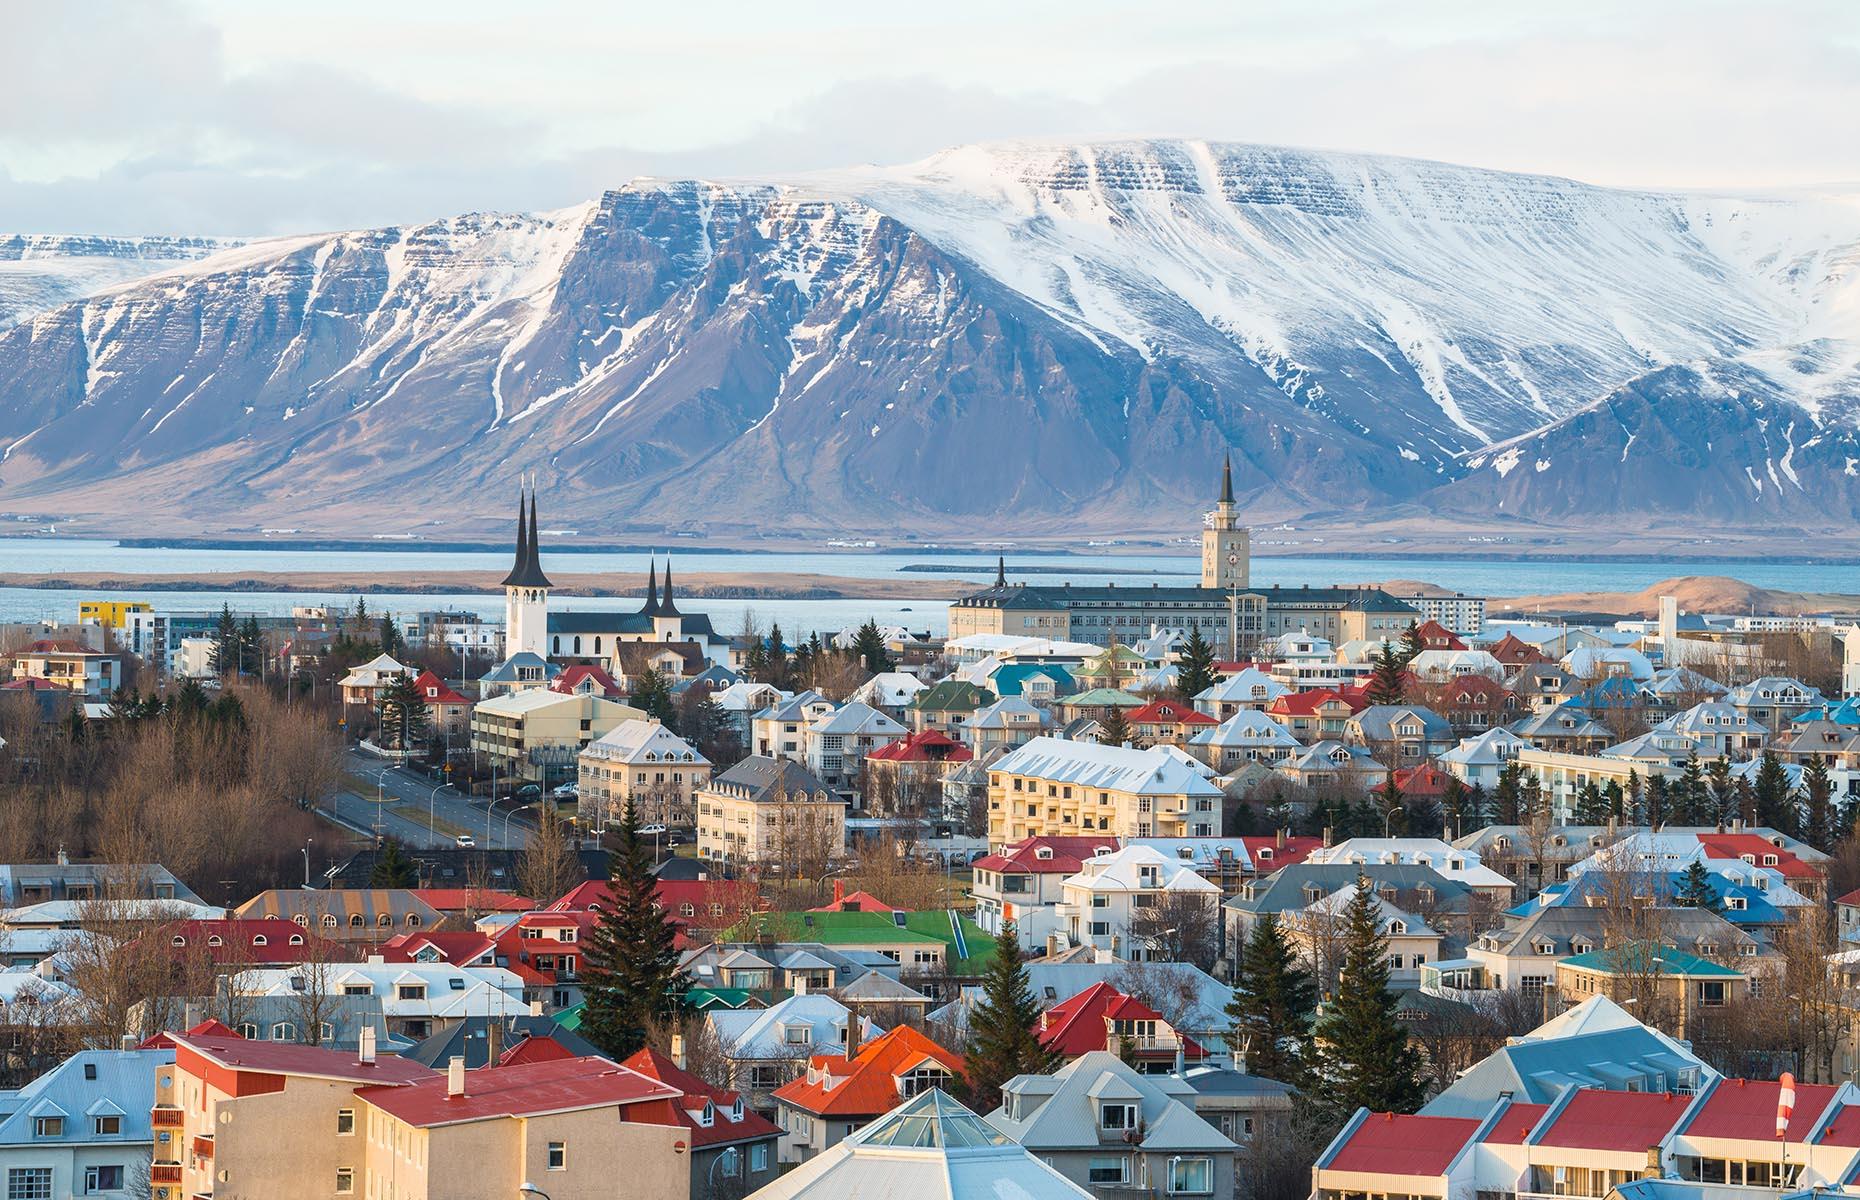 <p>From its clusters of colourful houses to the sculptural drama of Hallgrímskirkja (a parish church), <a href="http://www.loveexploring.com/guides/64365/what-to-do-in-reykjavik">Reykjavík</a> is one of a kind. Apart from its famous church, most of the city is low-rise, making Mount Esja – usually dusted with snow well into the warmer months – an even more impressive presence across the water. </p>